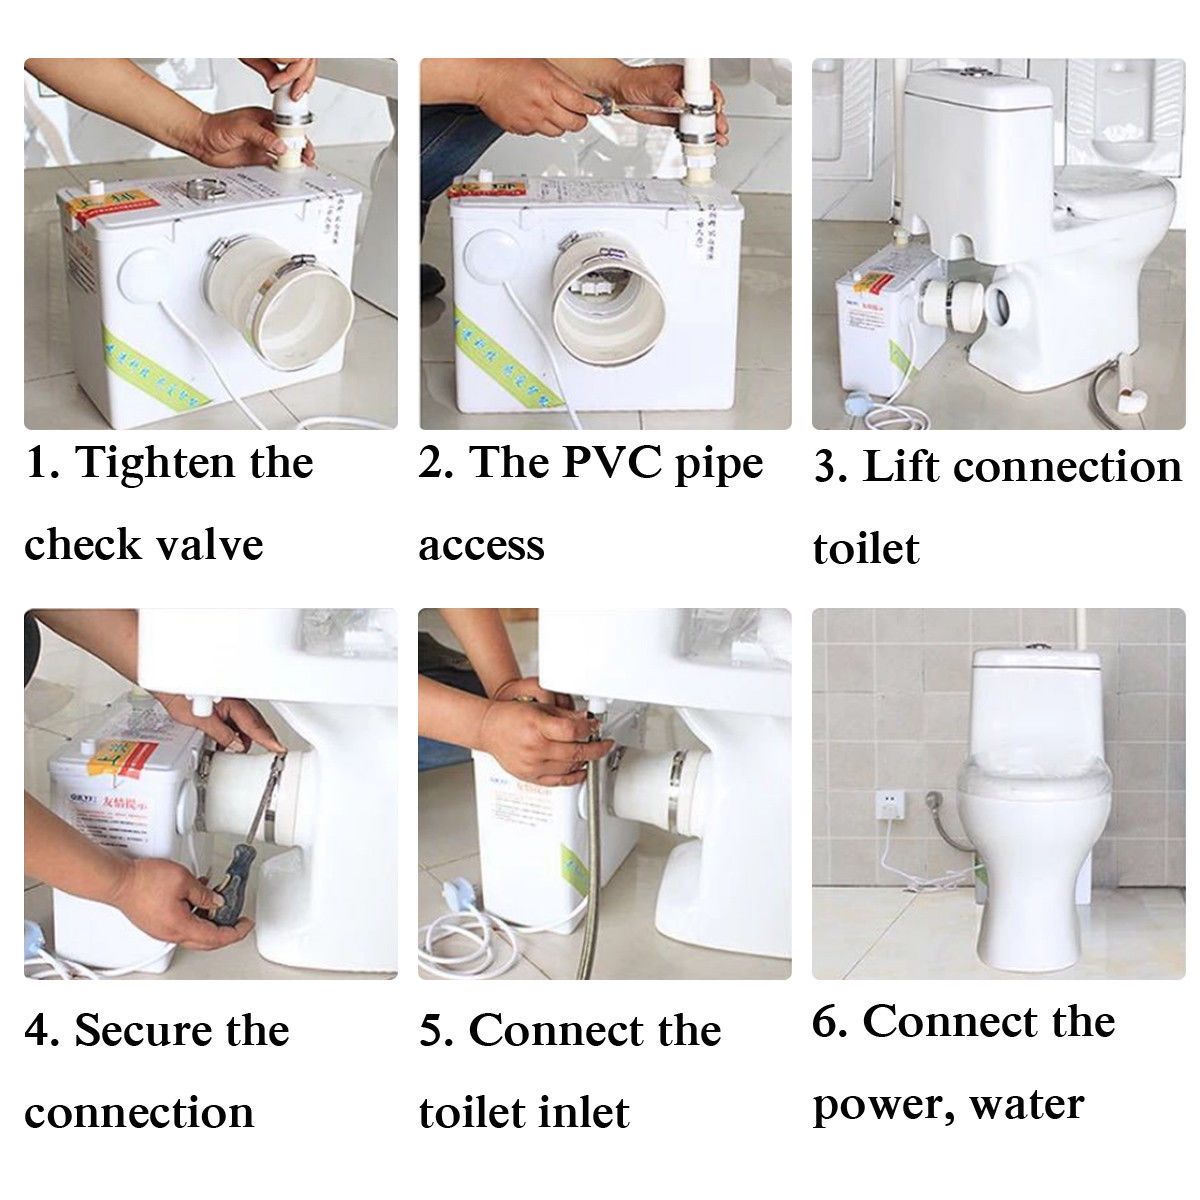 400W-220V-2-Outlet-Sanitary-Macerator-Pump-Auto-Disposal-Crush-Waste-Water-Toilet-Sink-1402024